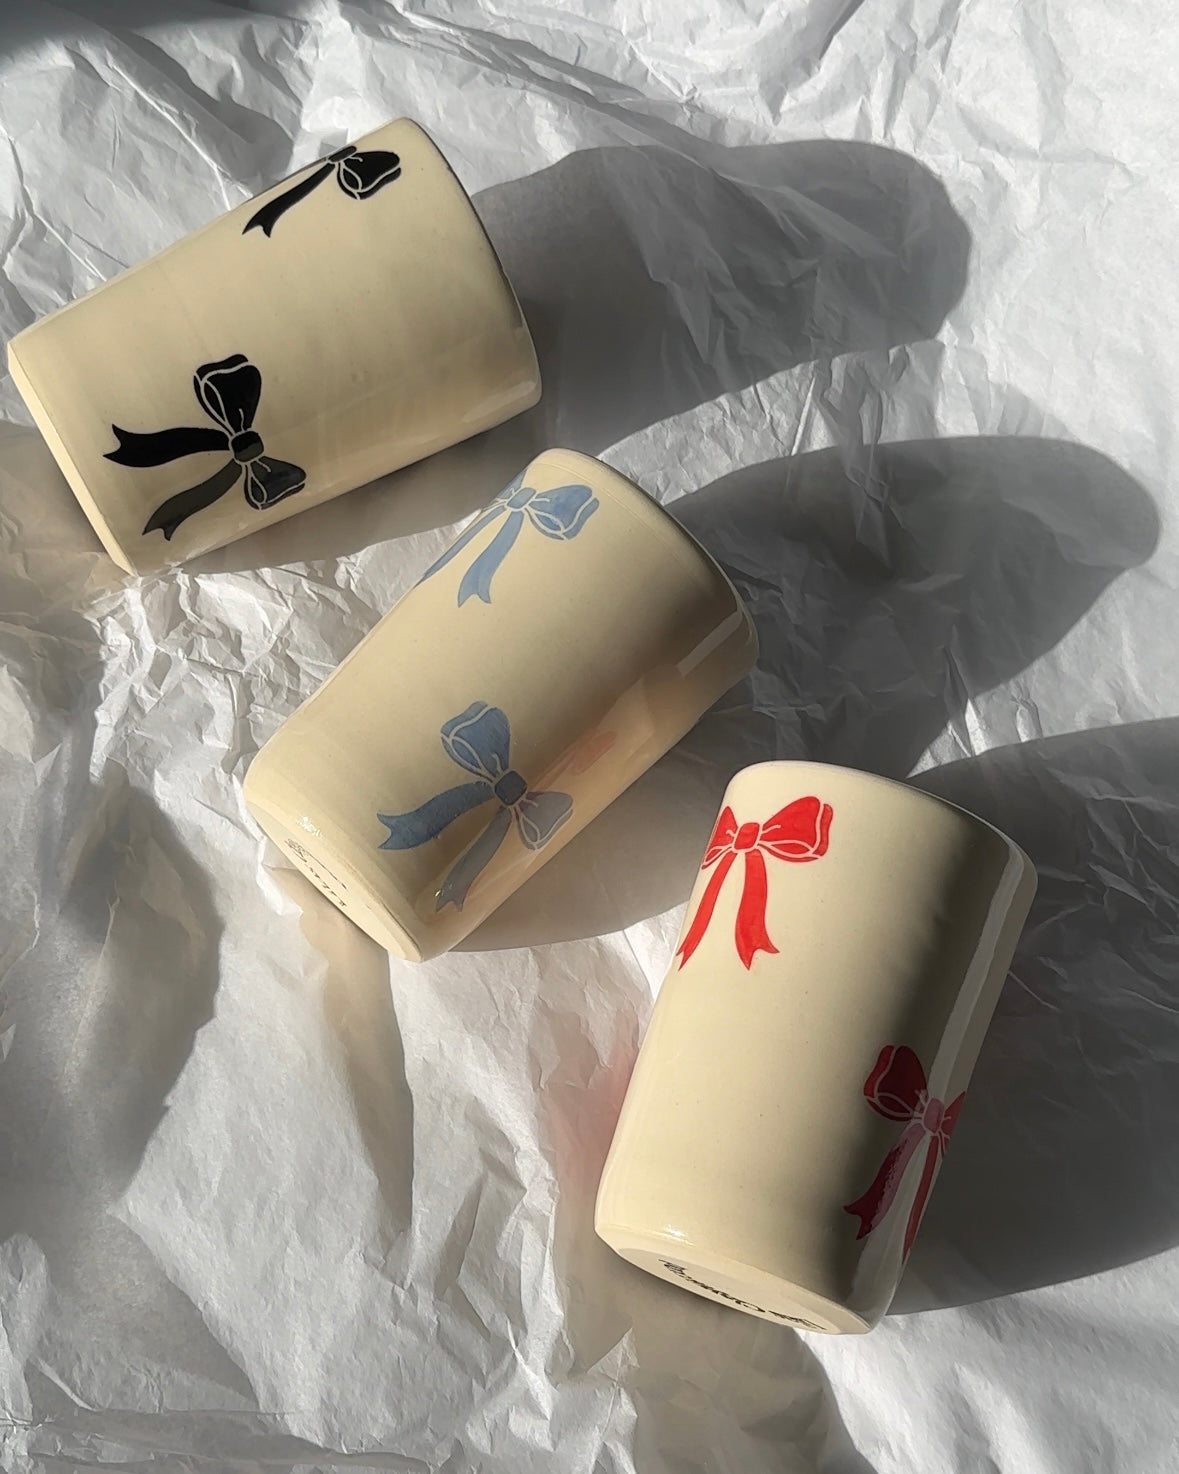 Ceramic Cup with 'Red' Bows - Handmade in Kansas City